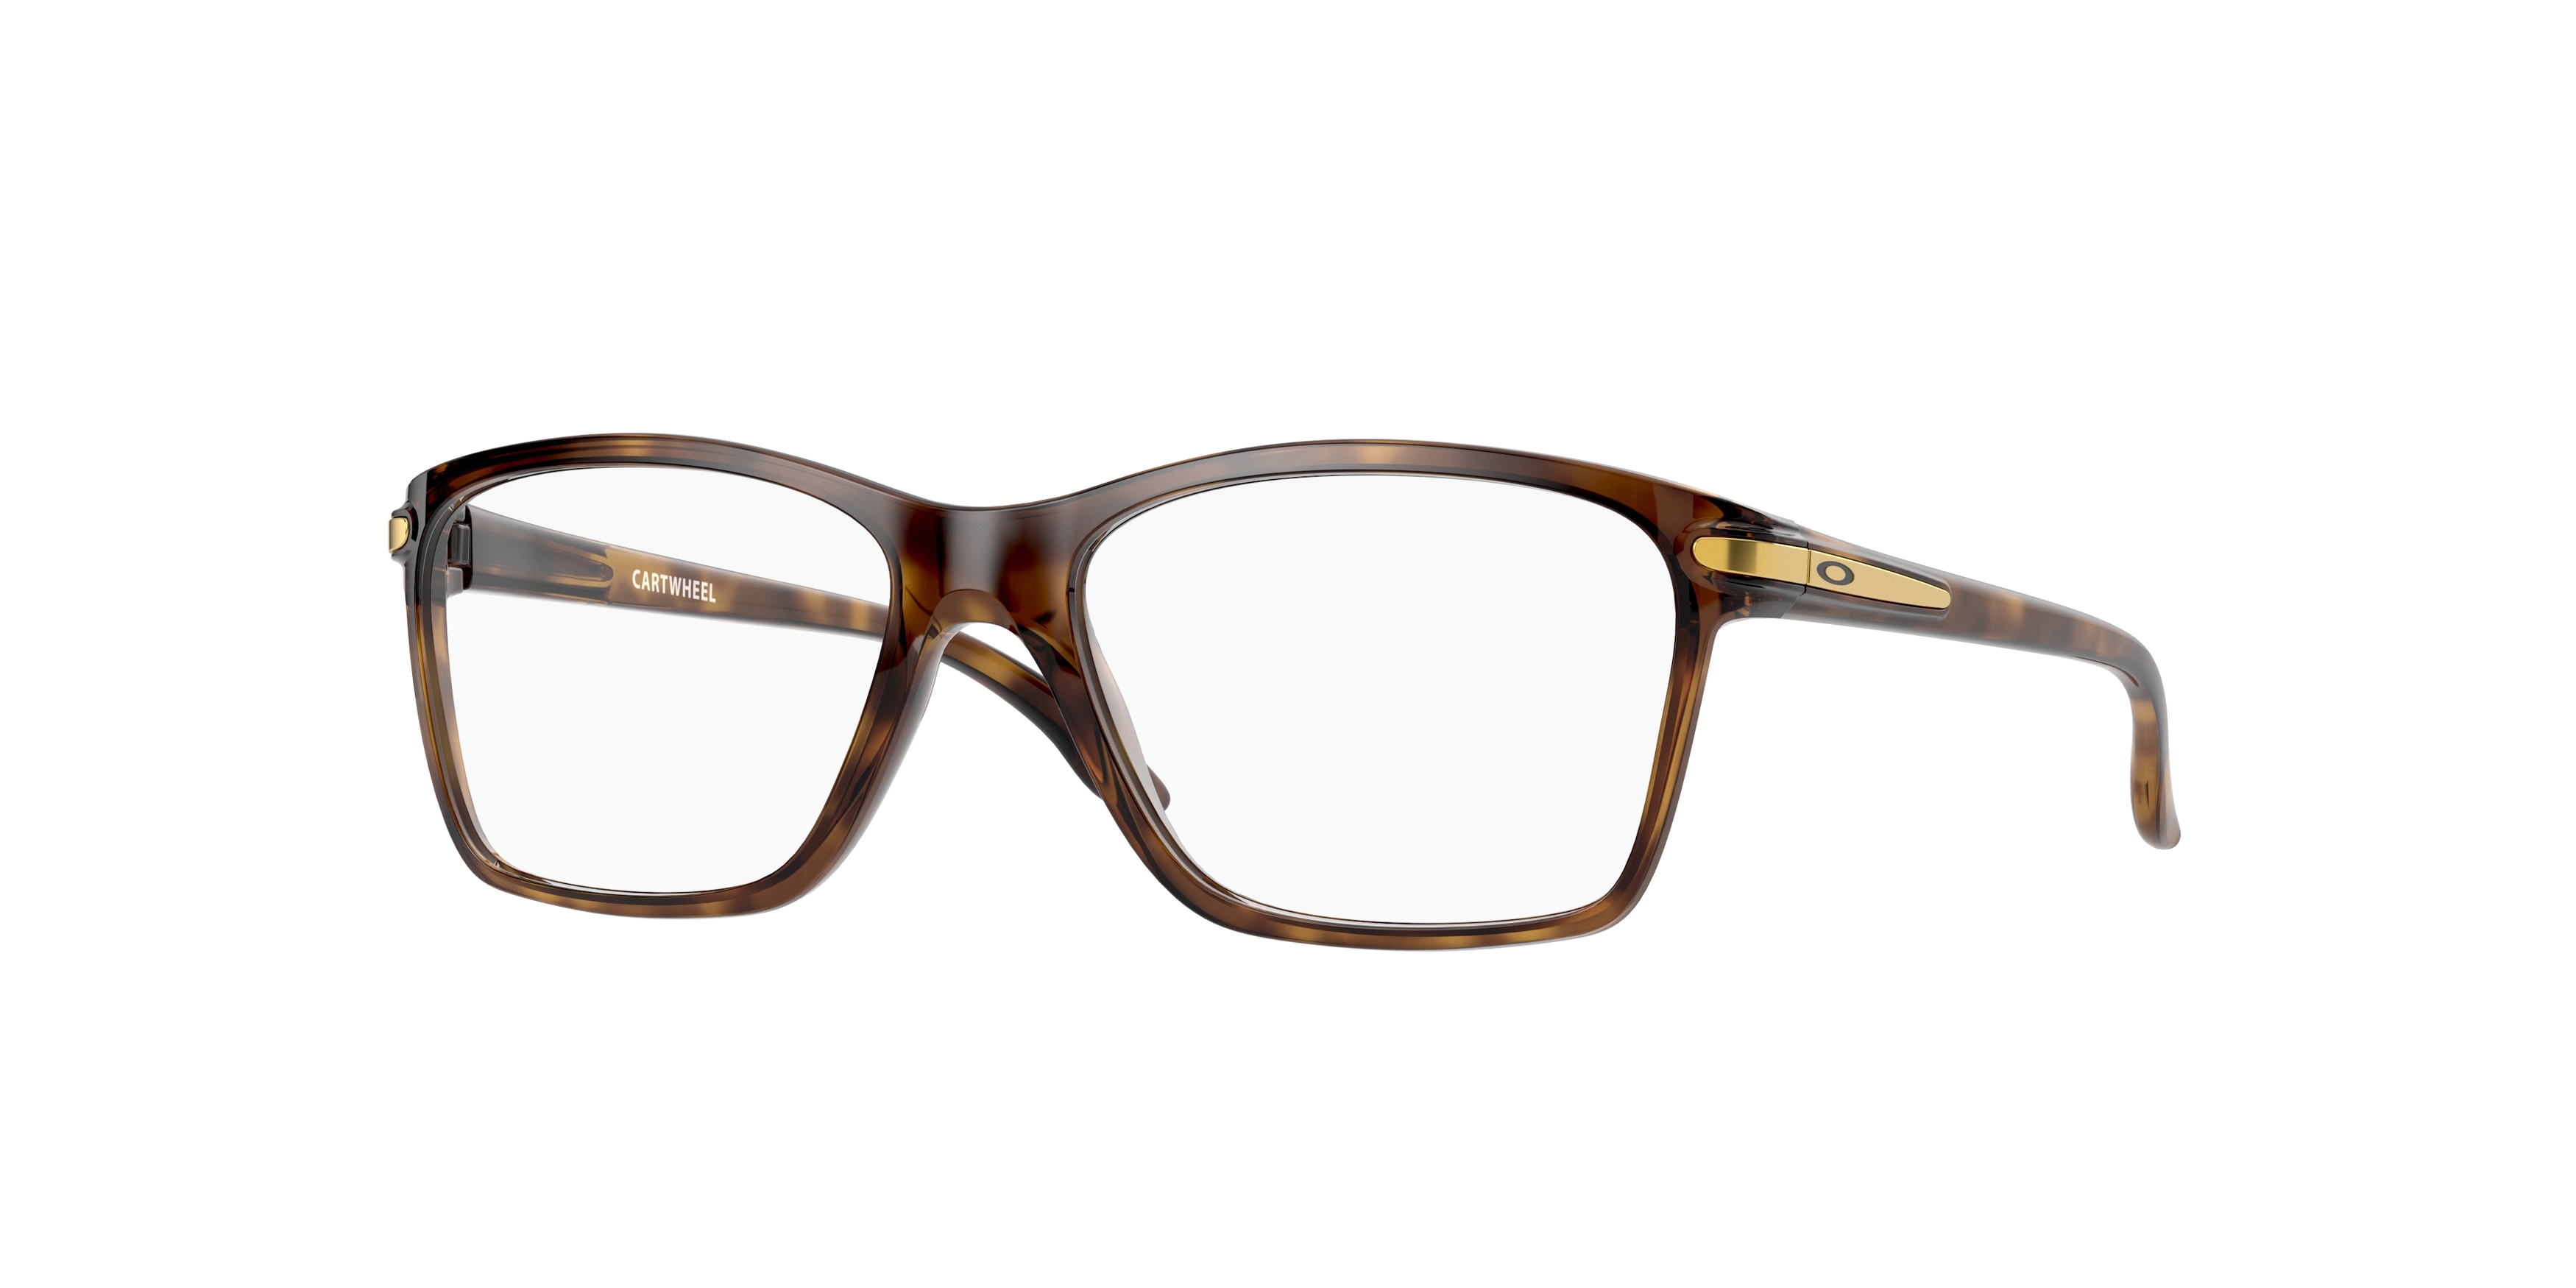 oakley_youth_0oy8010_801006_polished_brown_tortoise_ref